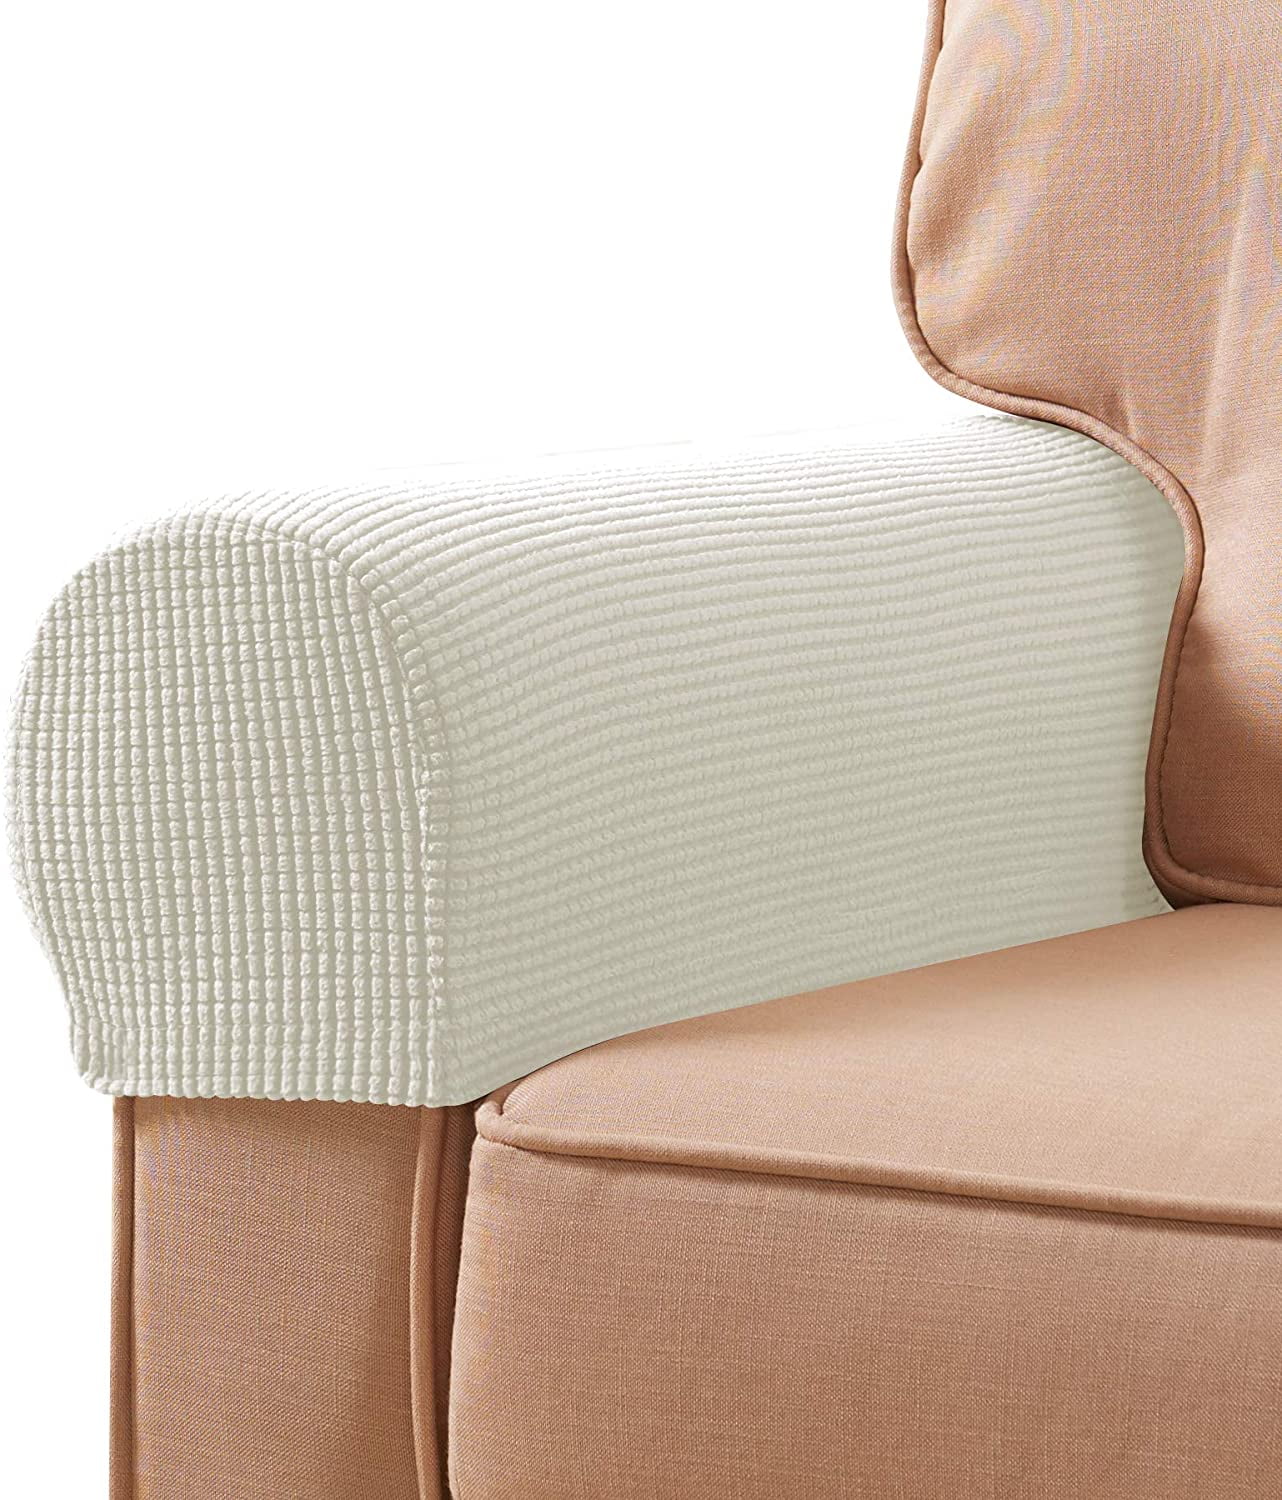 Beige Yours Bath 2Pcs Armrest Covers Spandex Stretch Fabric Waterproof Arm Caps Anti-Slip Furniture Protector Slipcovers for Armchairs Sofa Couches Recliner 